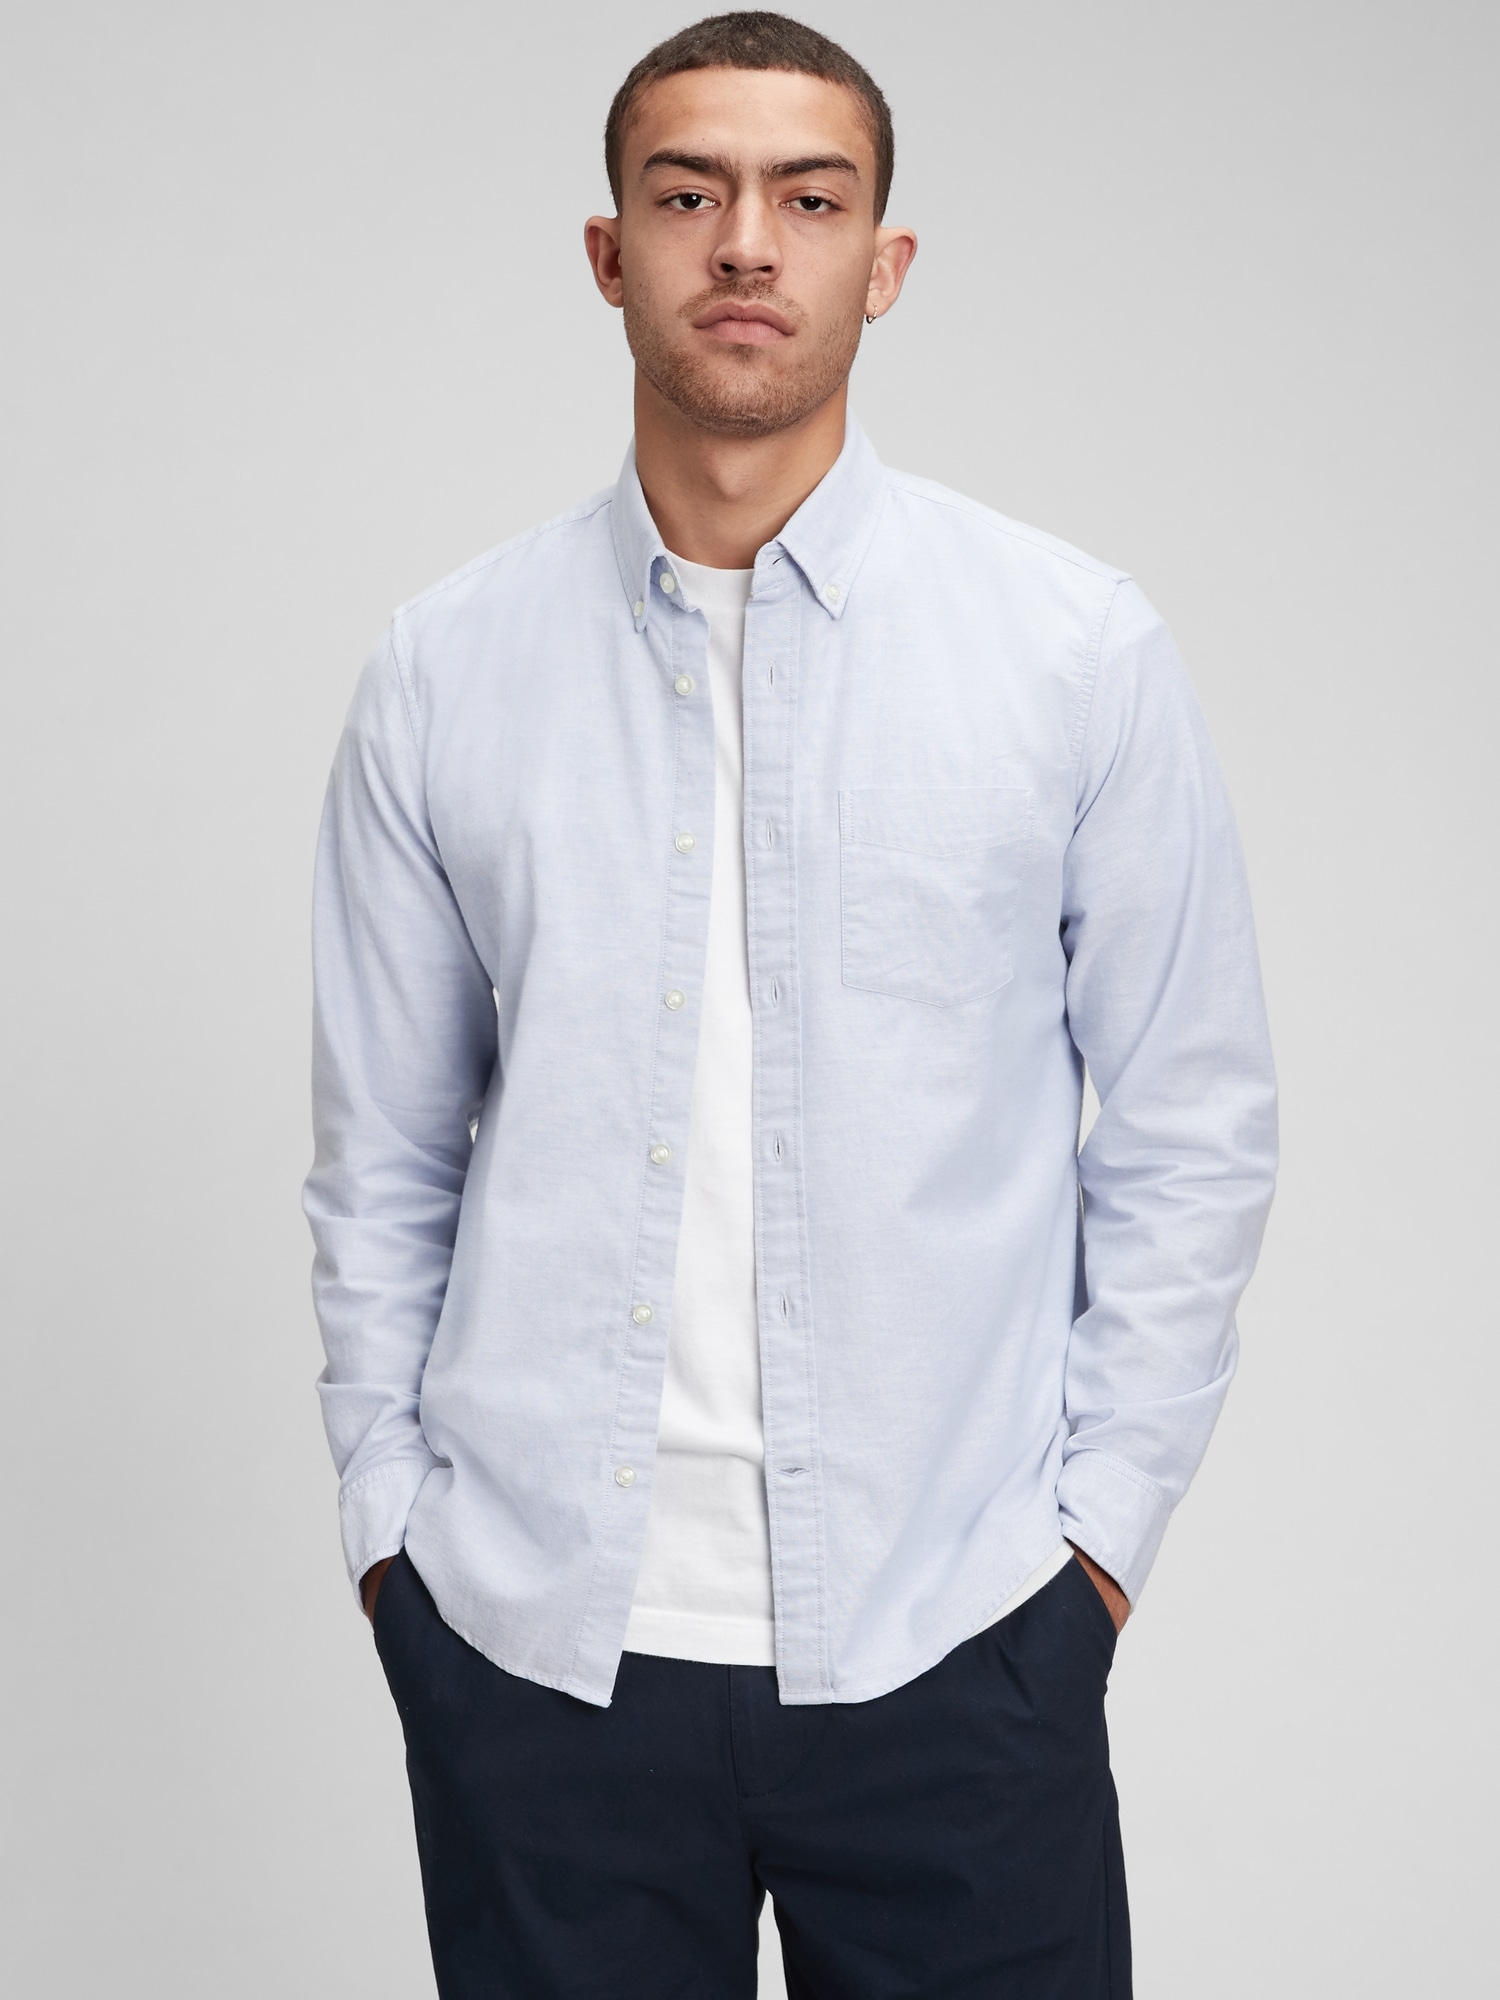 Gap Classic Oxford Shirt In Untucked Fit With In-conversion Cotton In Blue Oxford